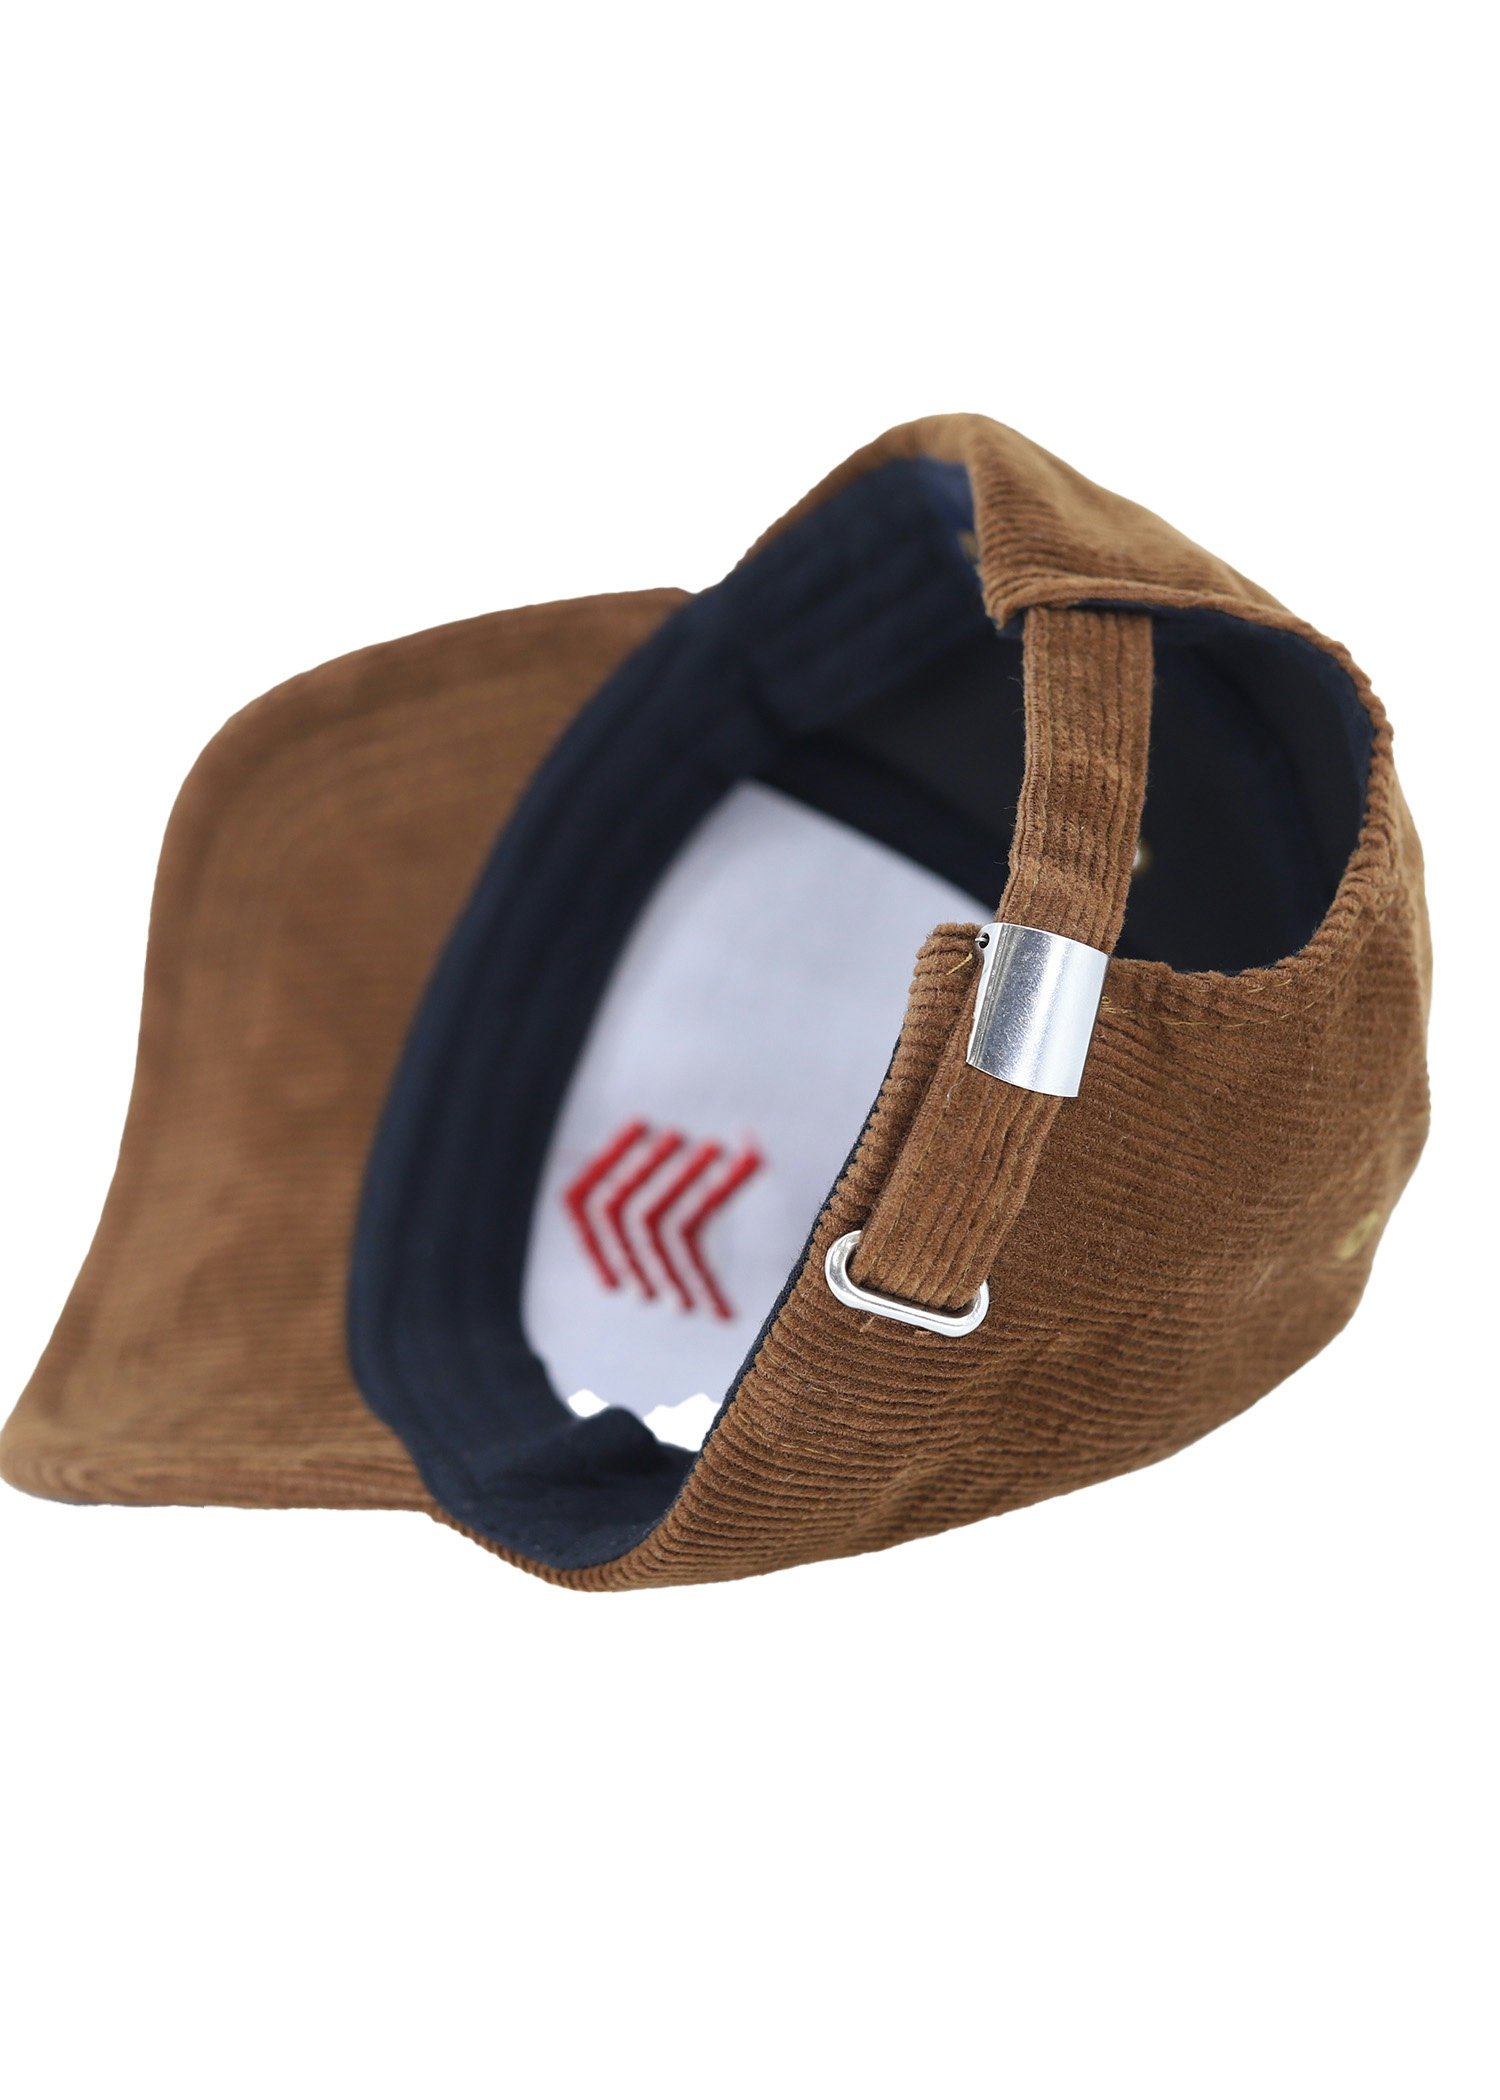 rooster cord cap brown color back view